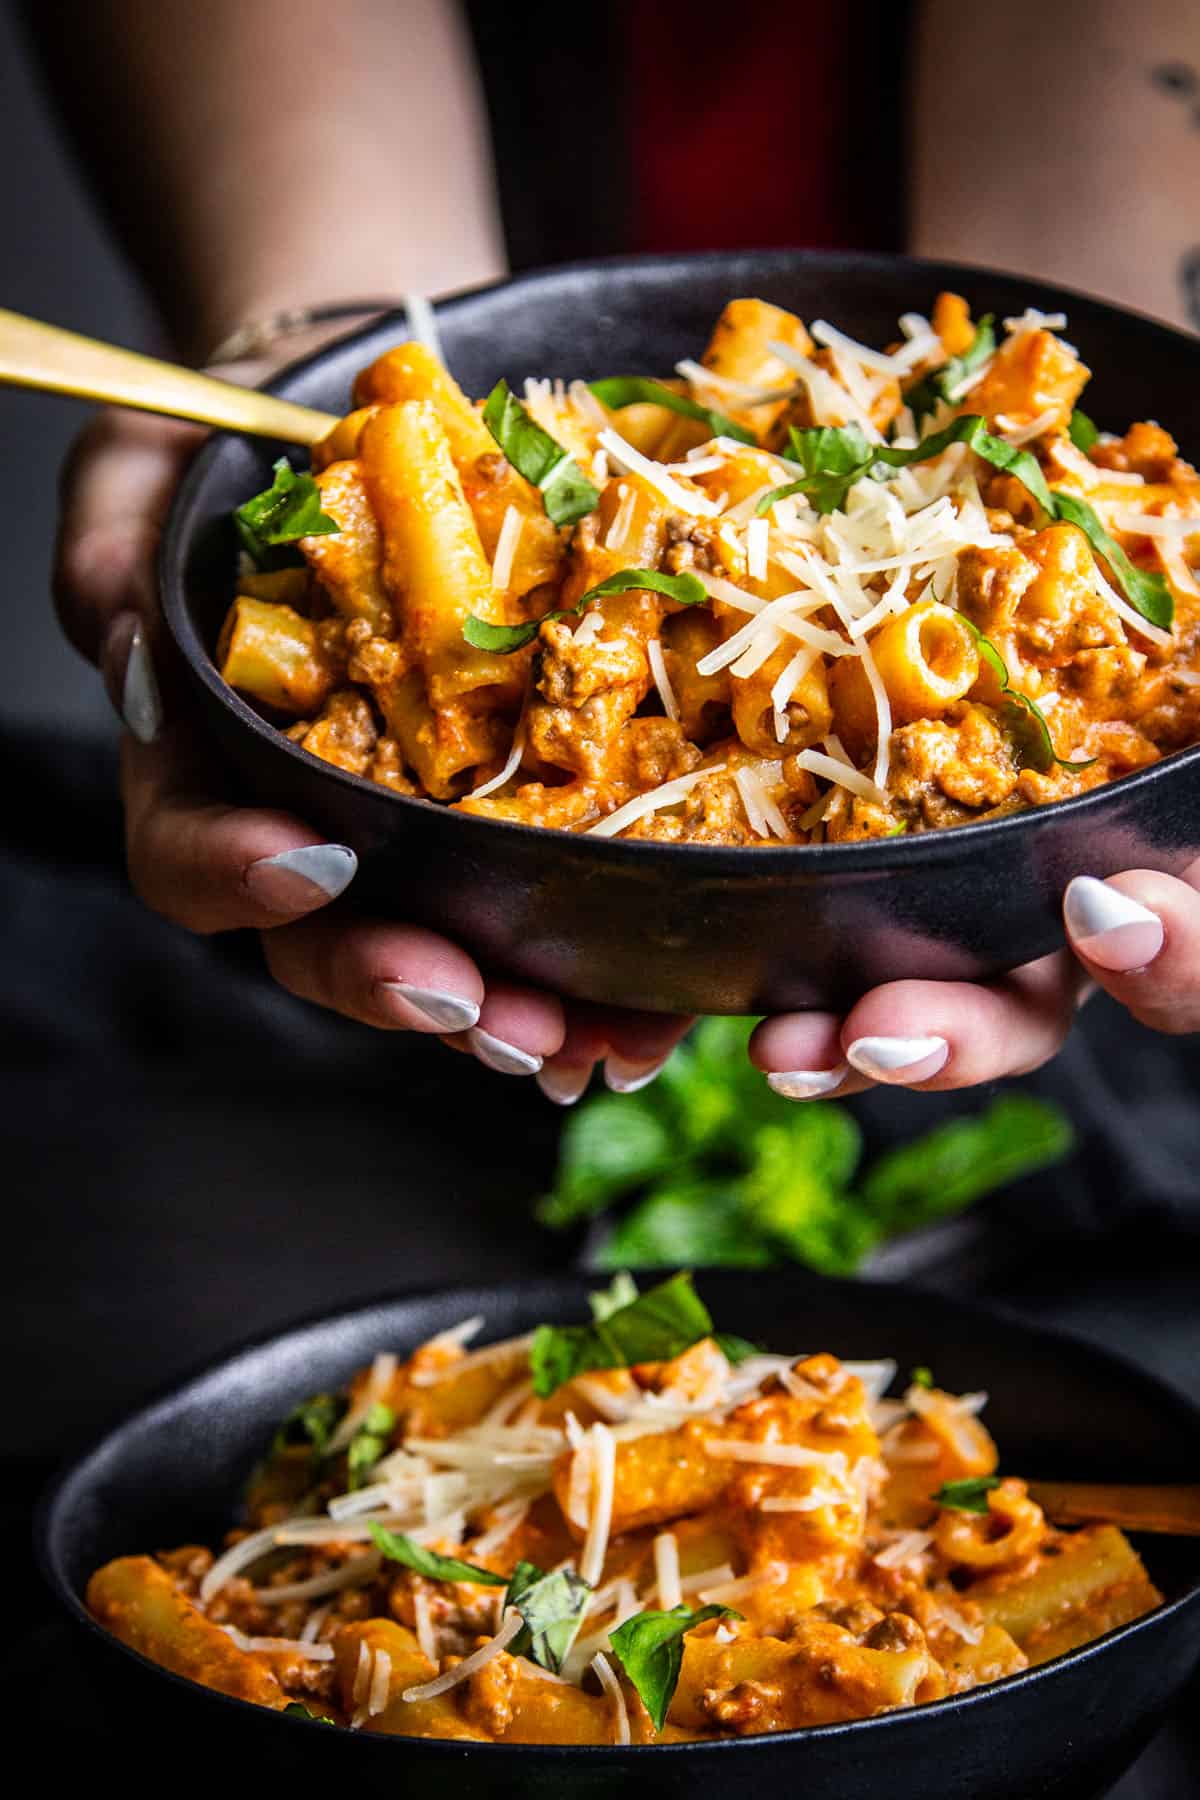 hands holding a bowl of pasta